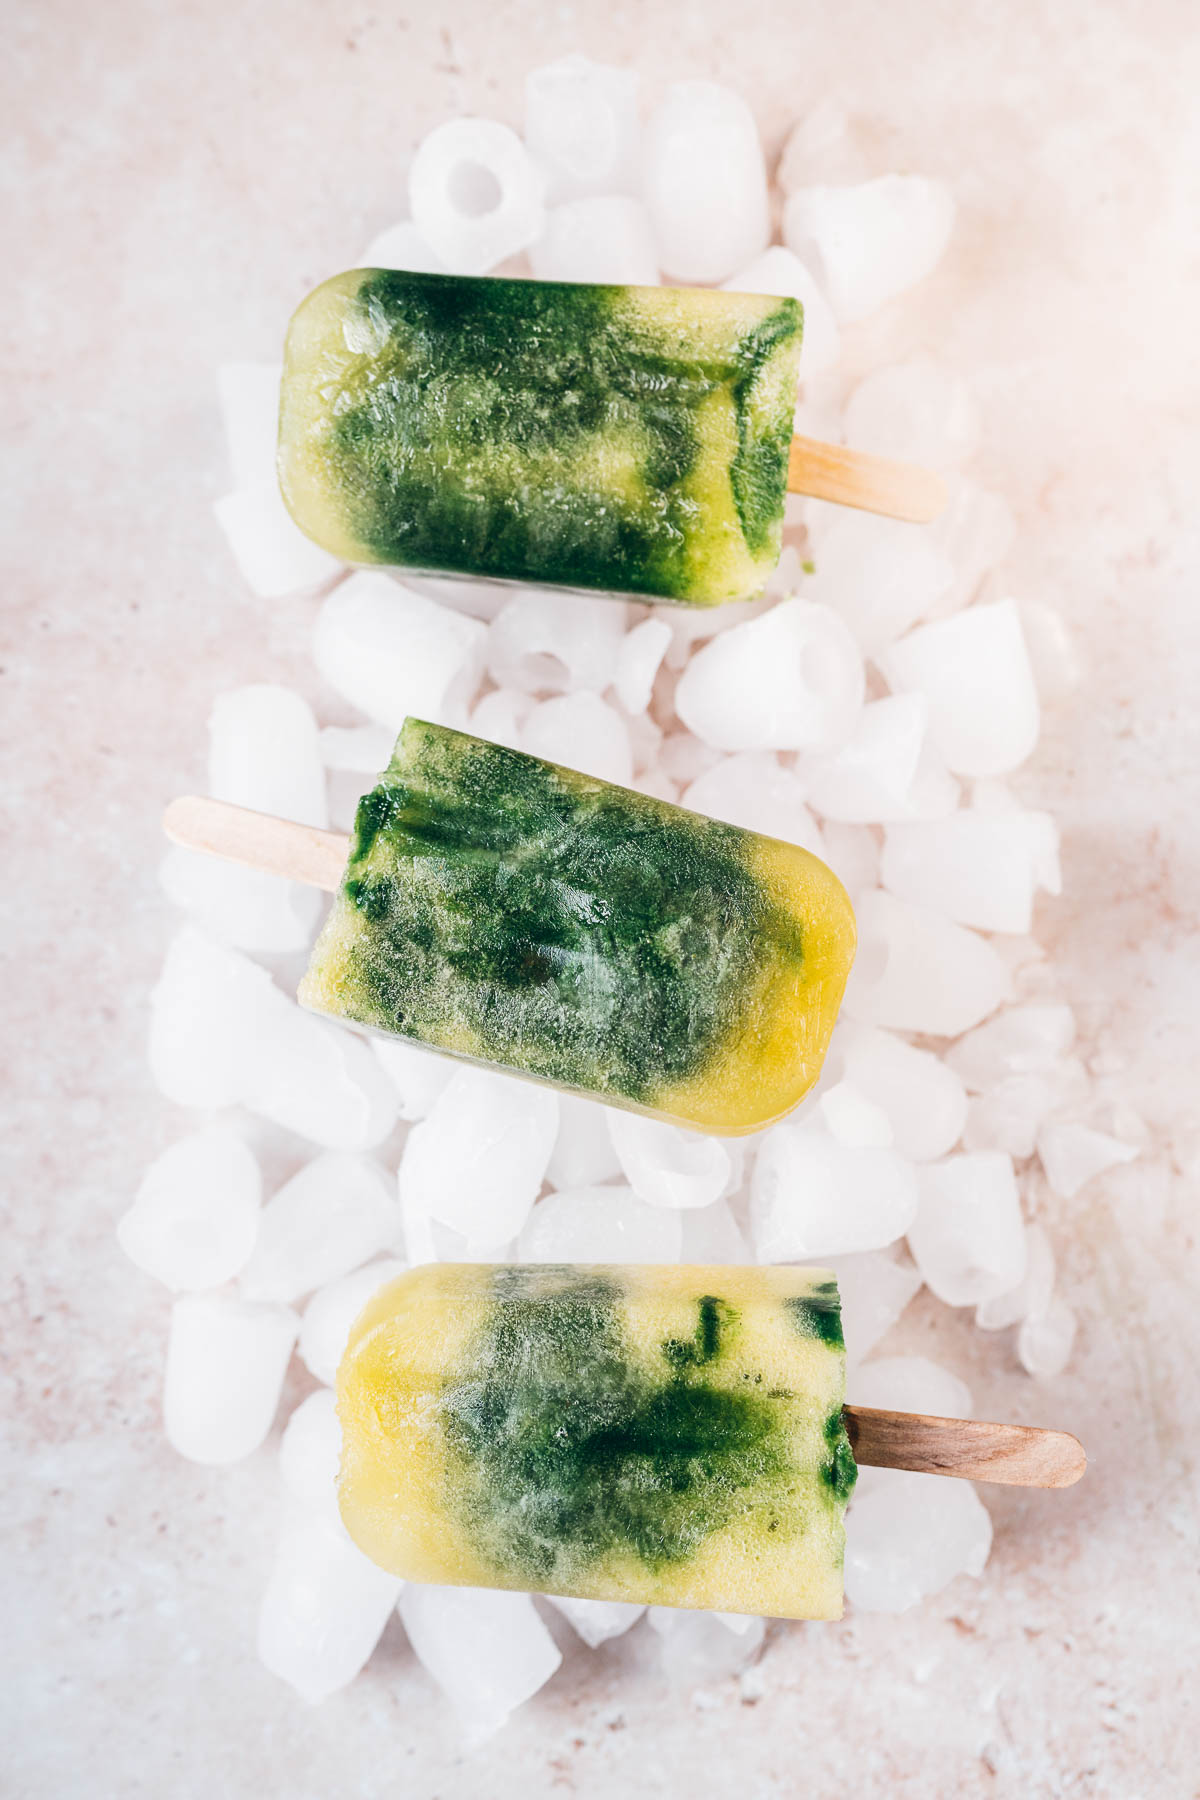 Three homemade ice pops resting on a table covered in ice.